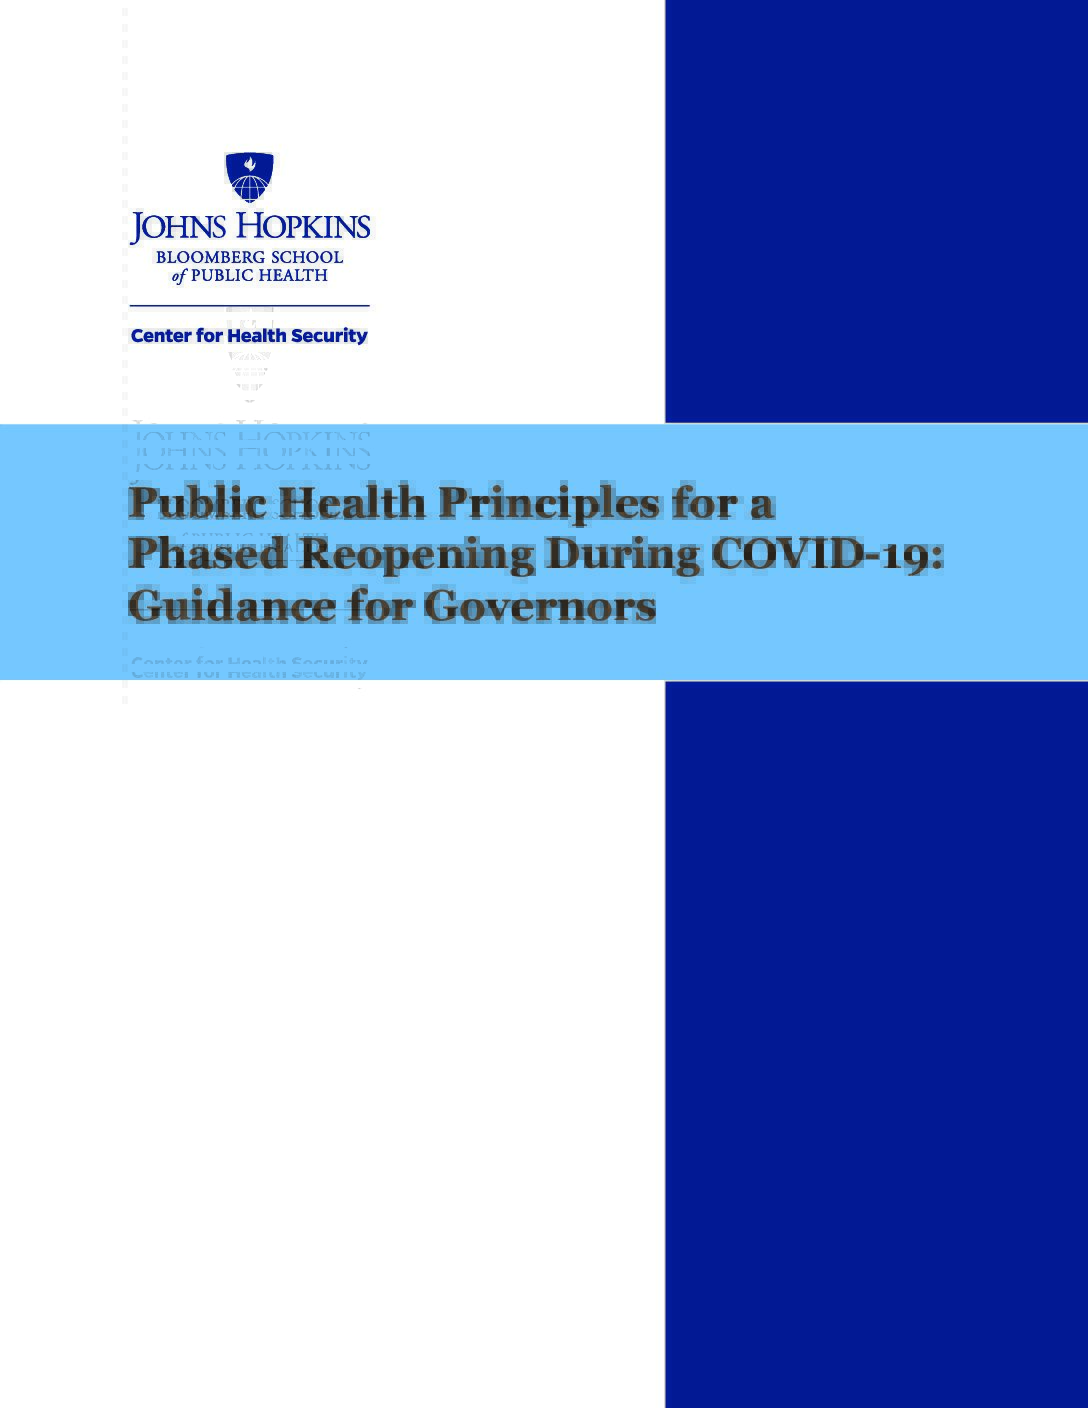 Phased Reopening During COVID-19: Public Health Principles